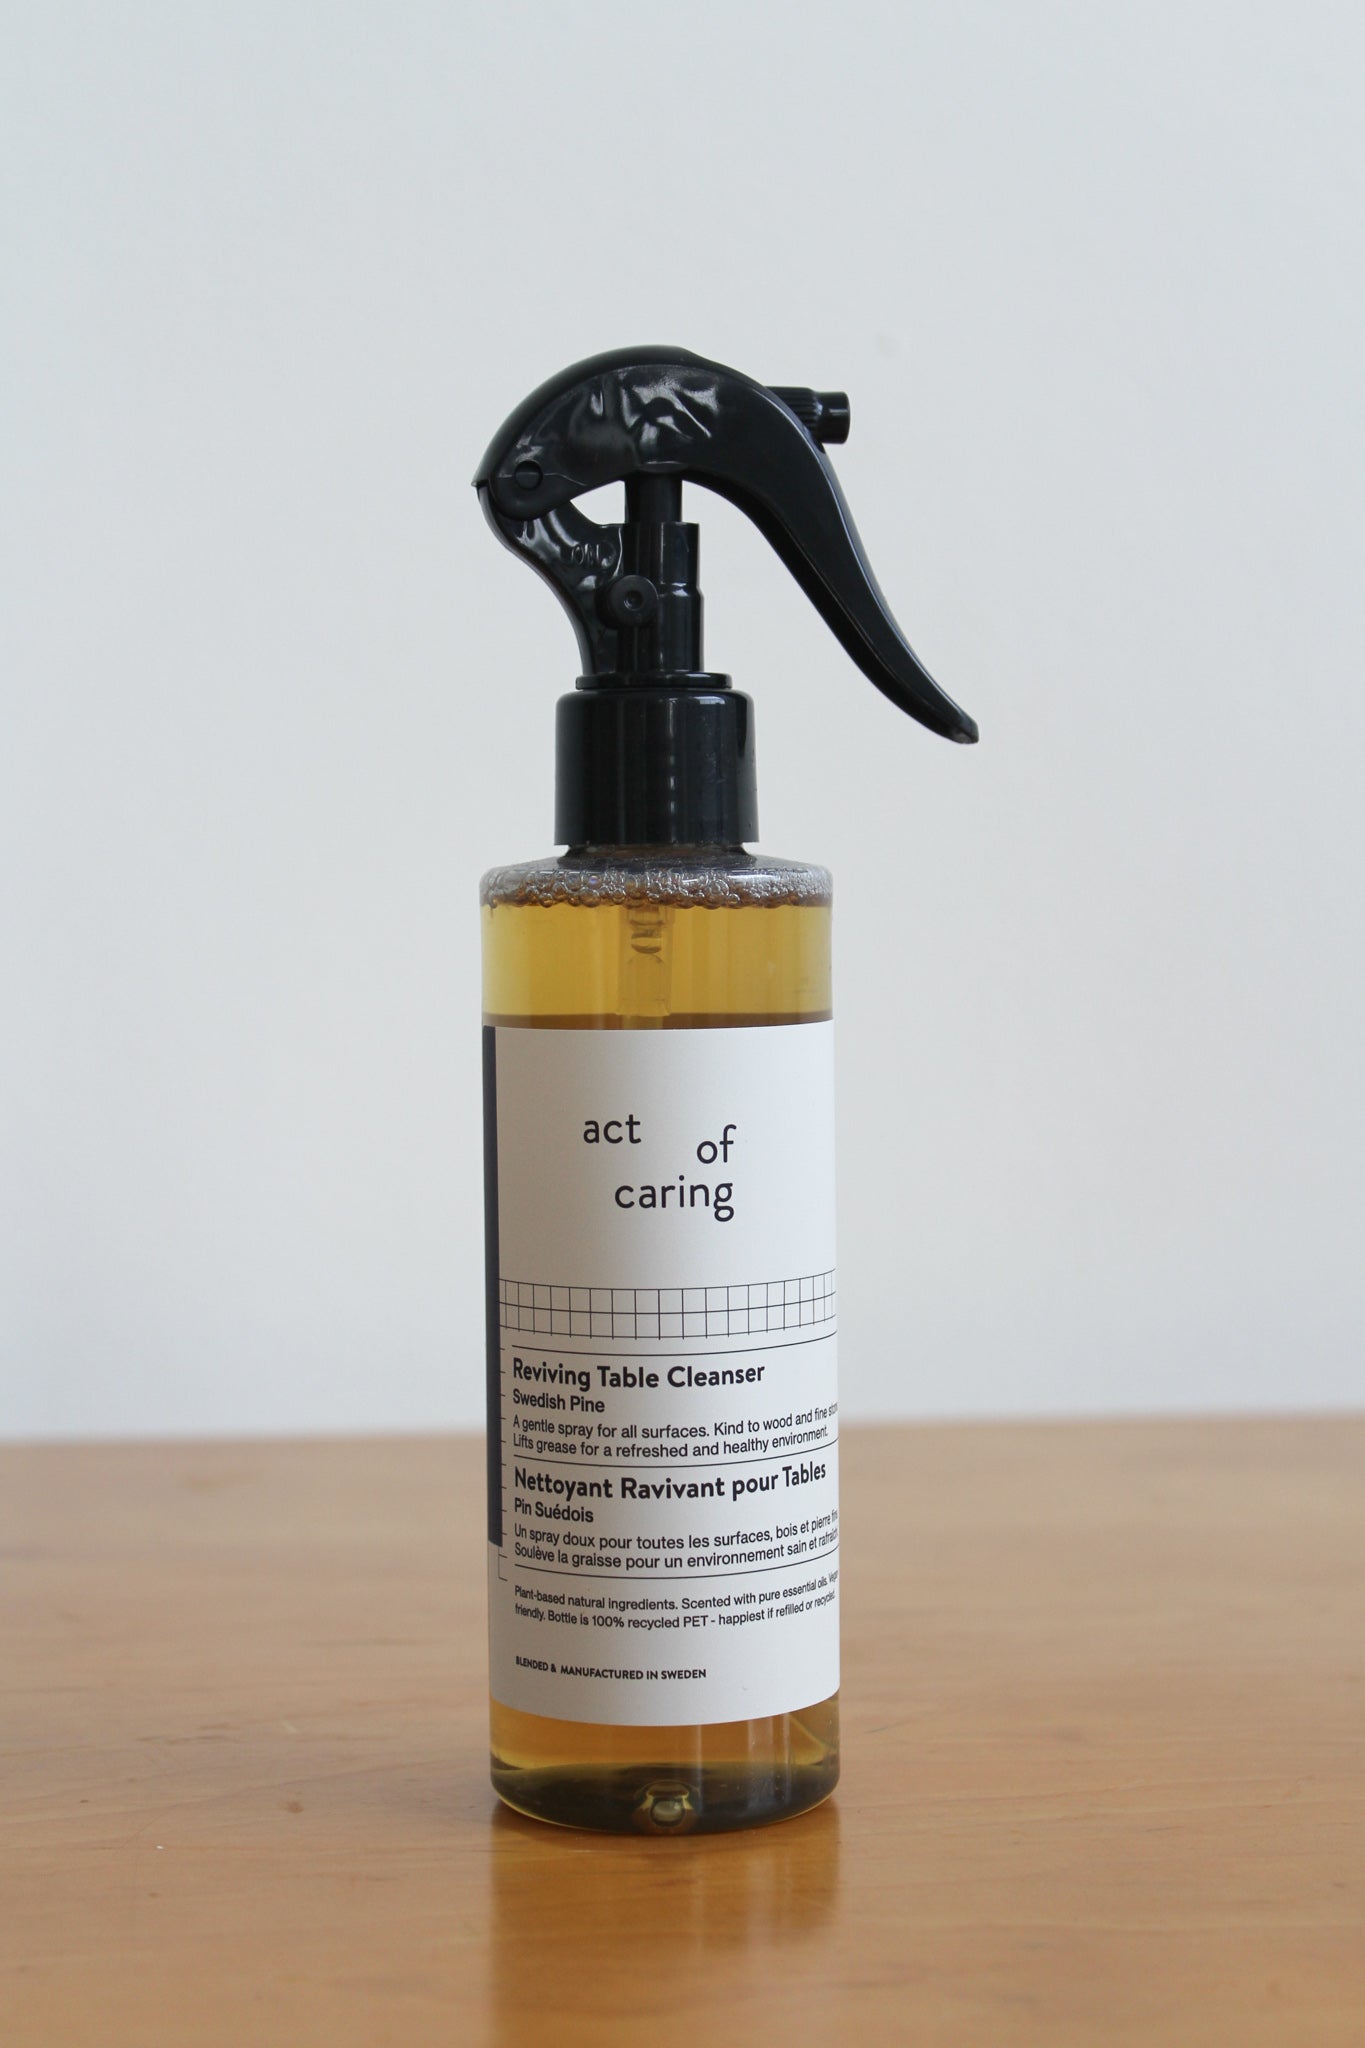 Reviving Table Cleanser by Act of Caring